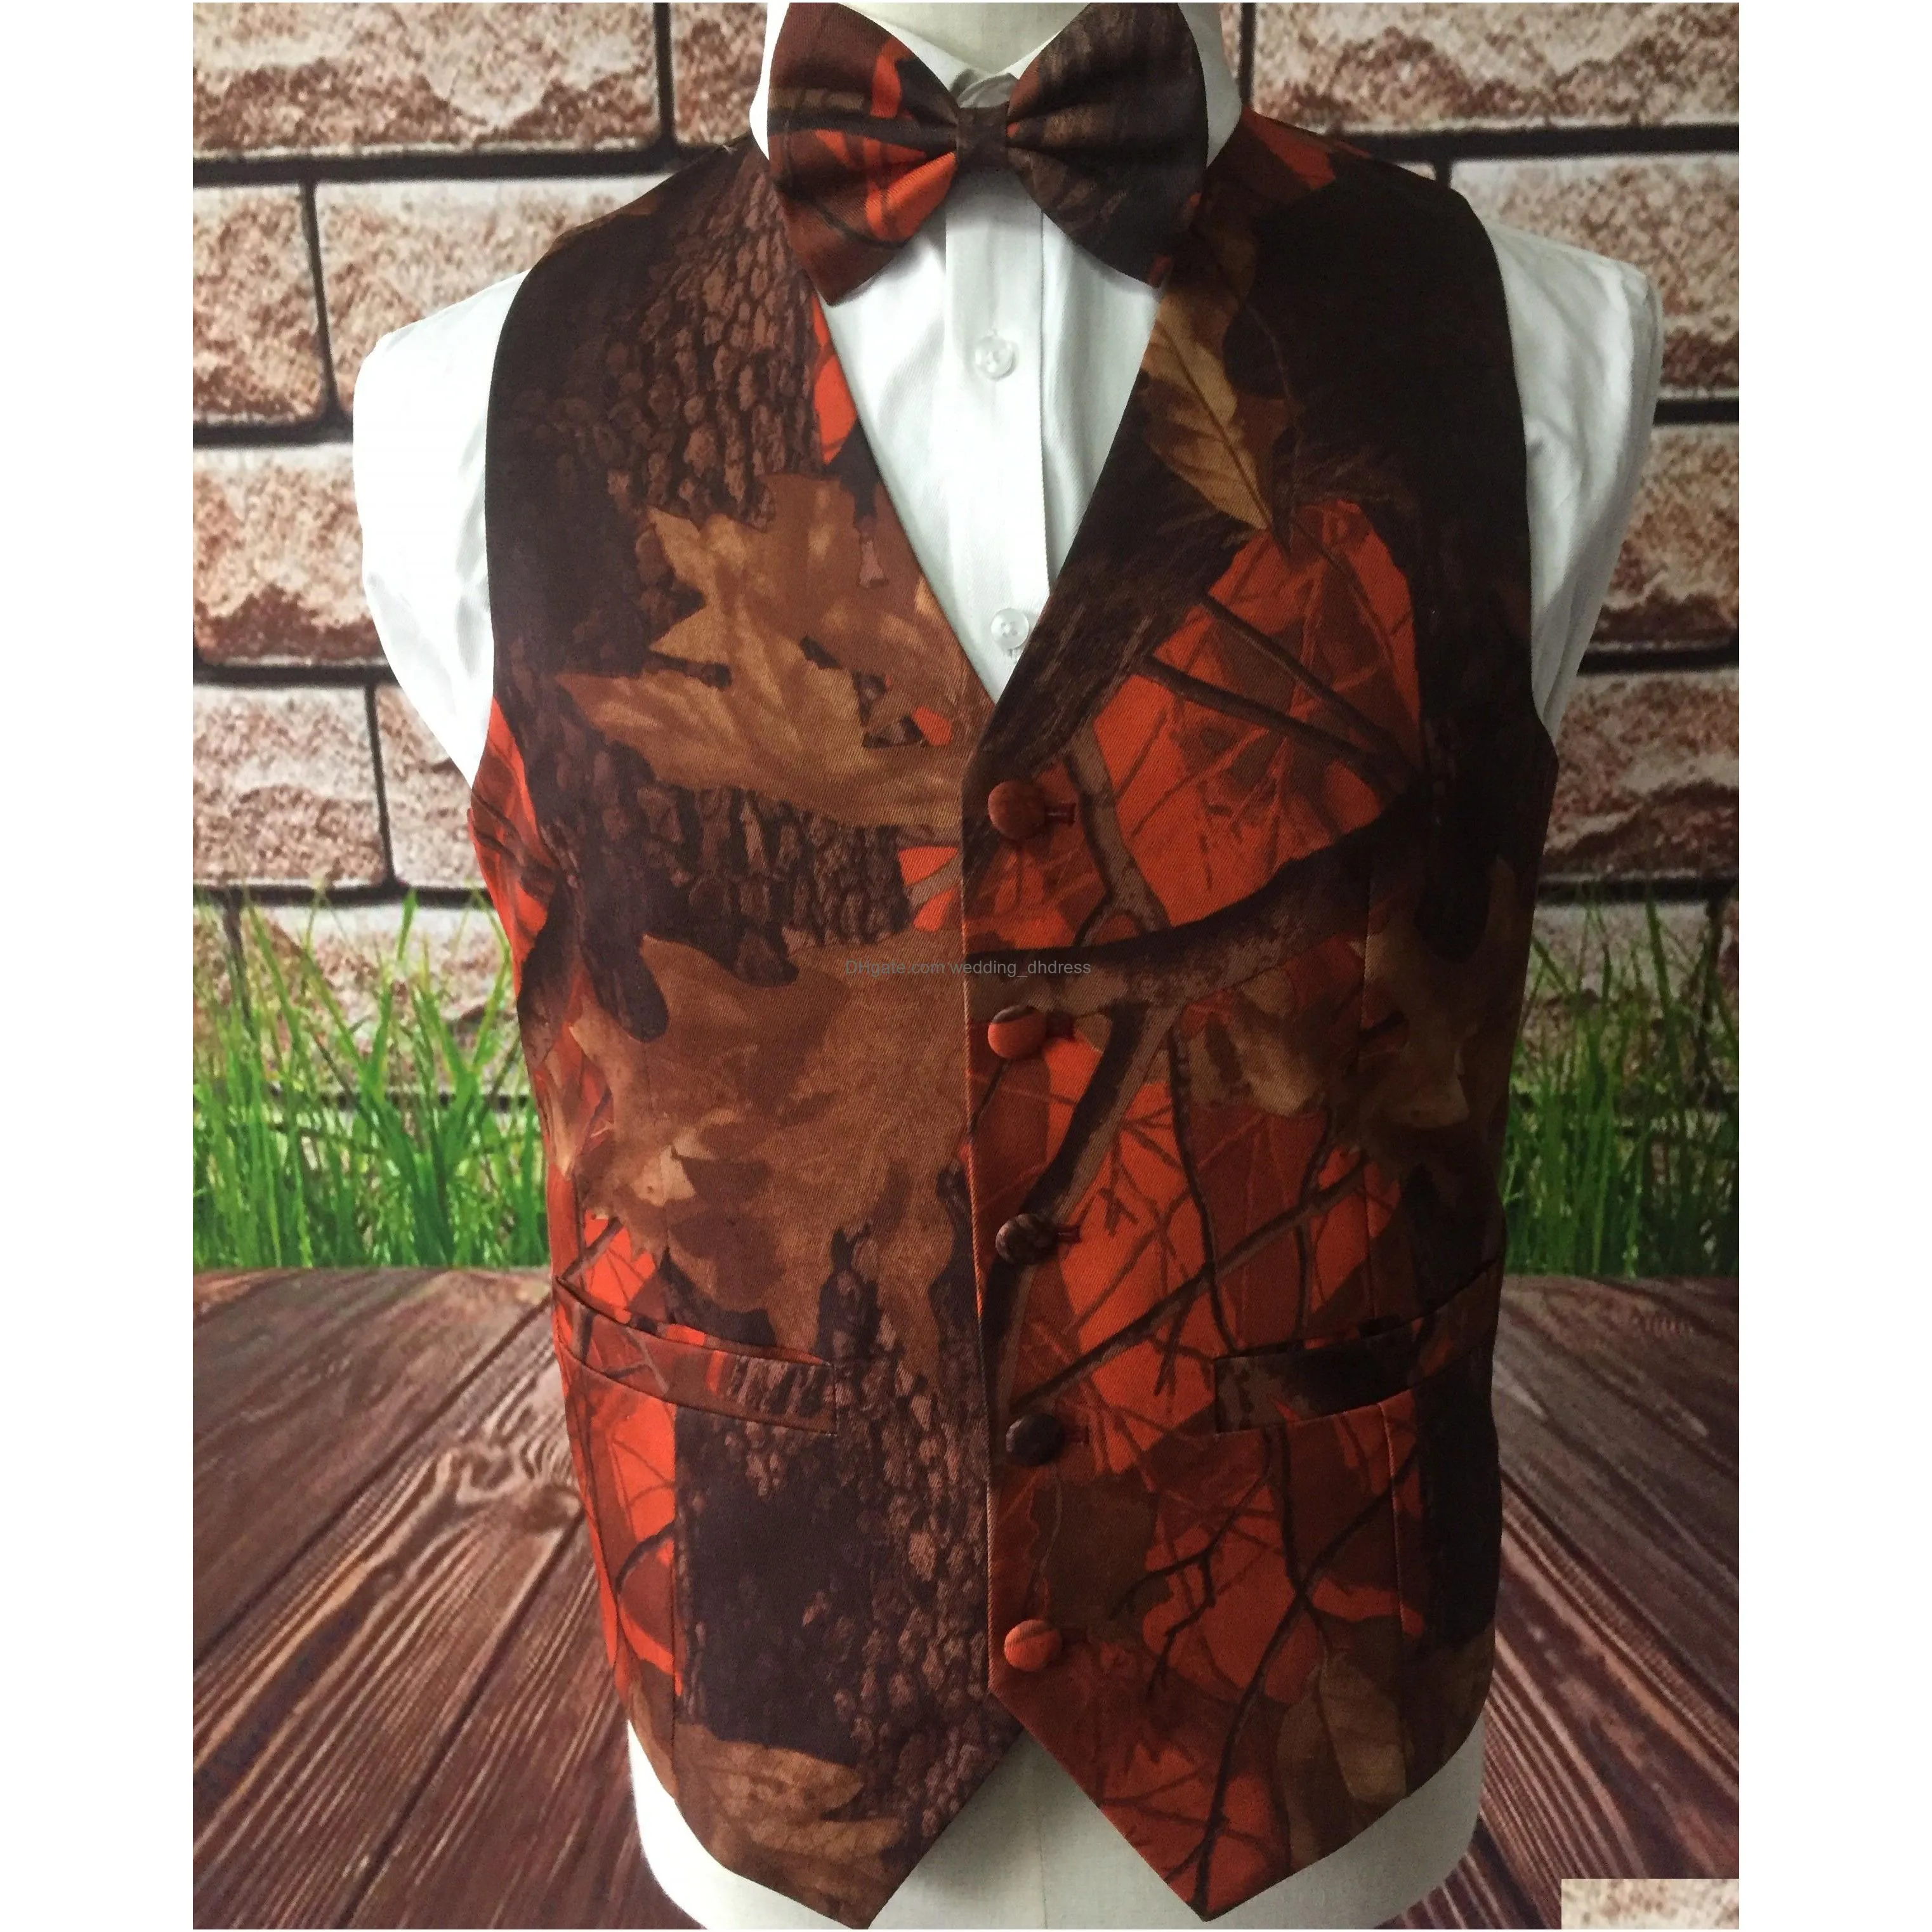 print camo groom vests for country wedding camouflage slim fit mens waistcoat dress attire 2 piece set vest and tie custom made plus size in